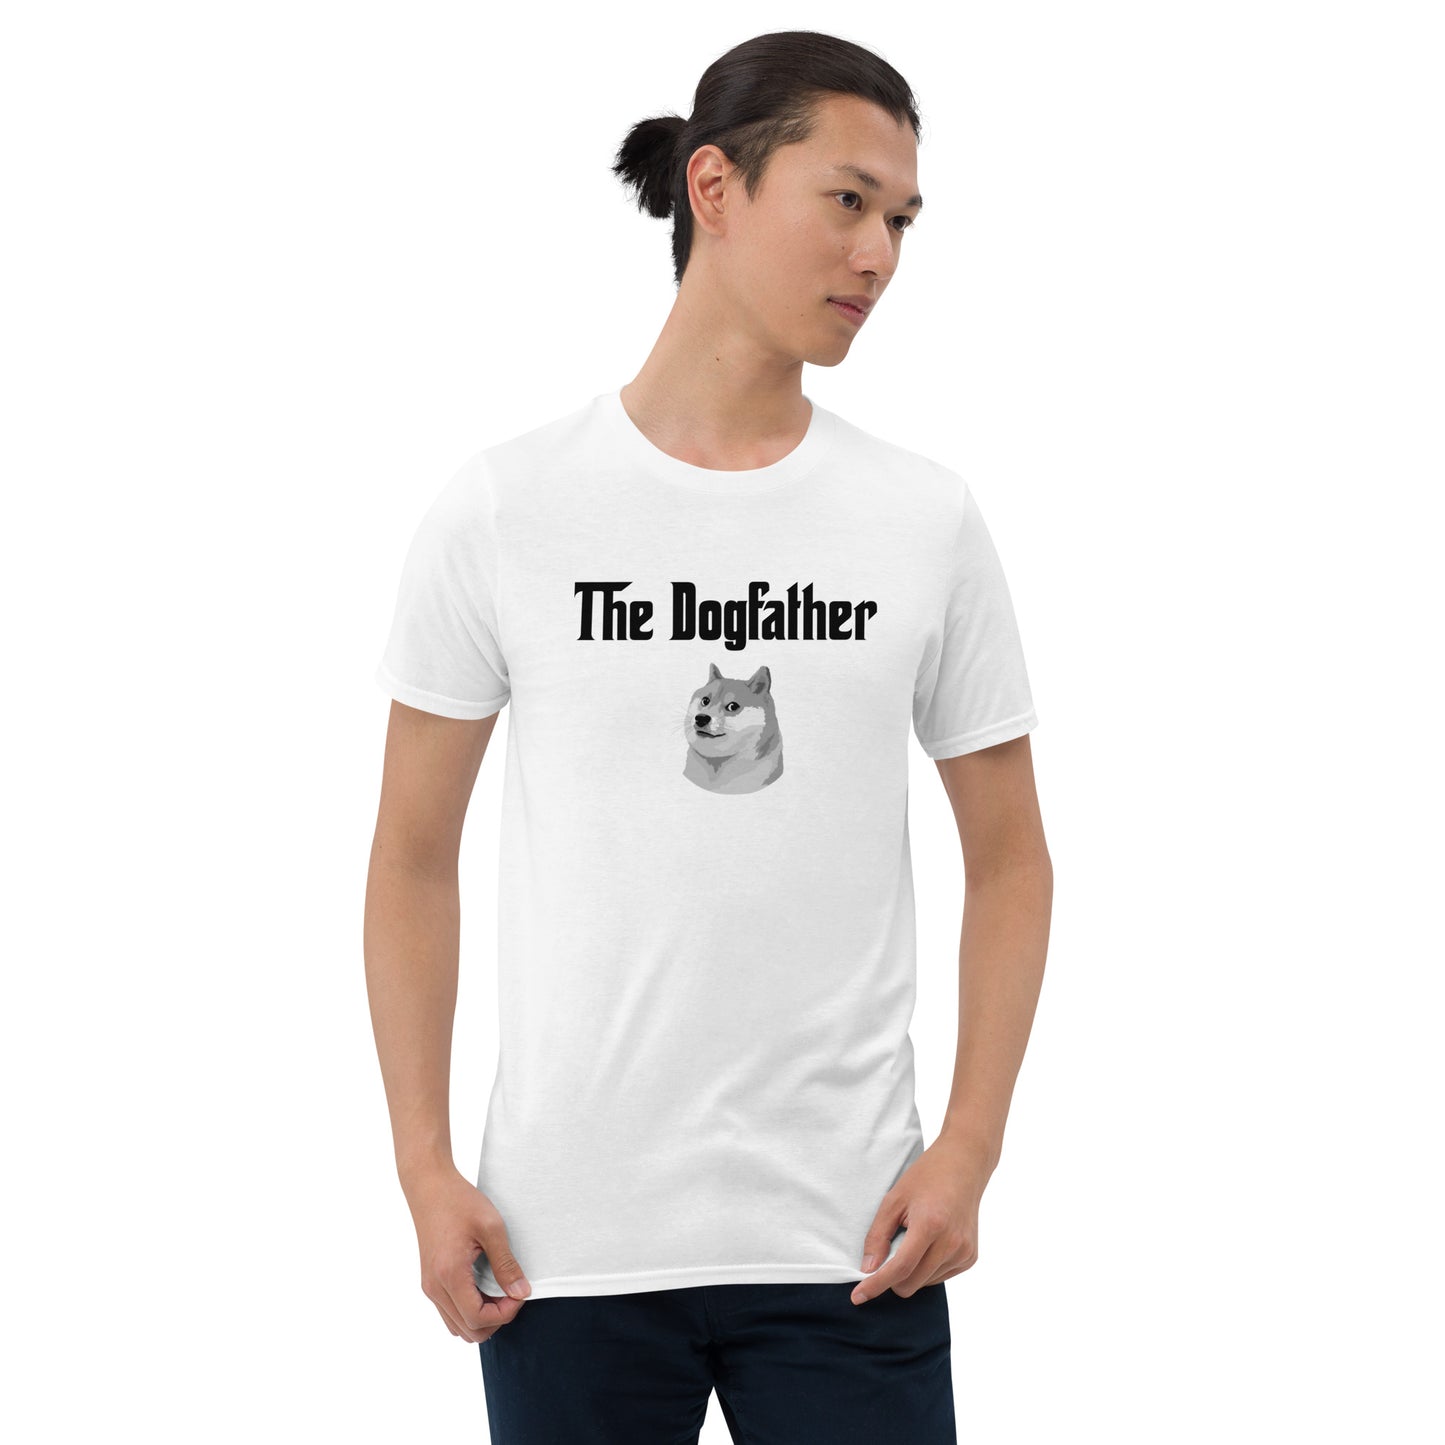 The Dogfather Unisex T-Shirt